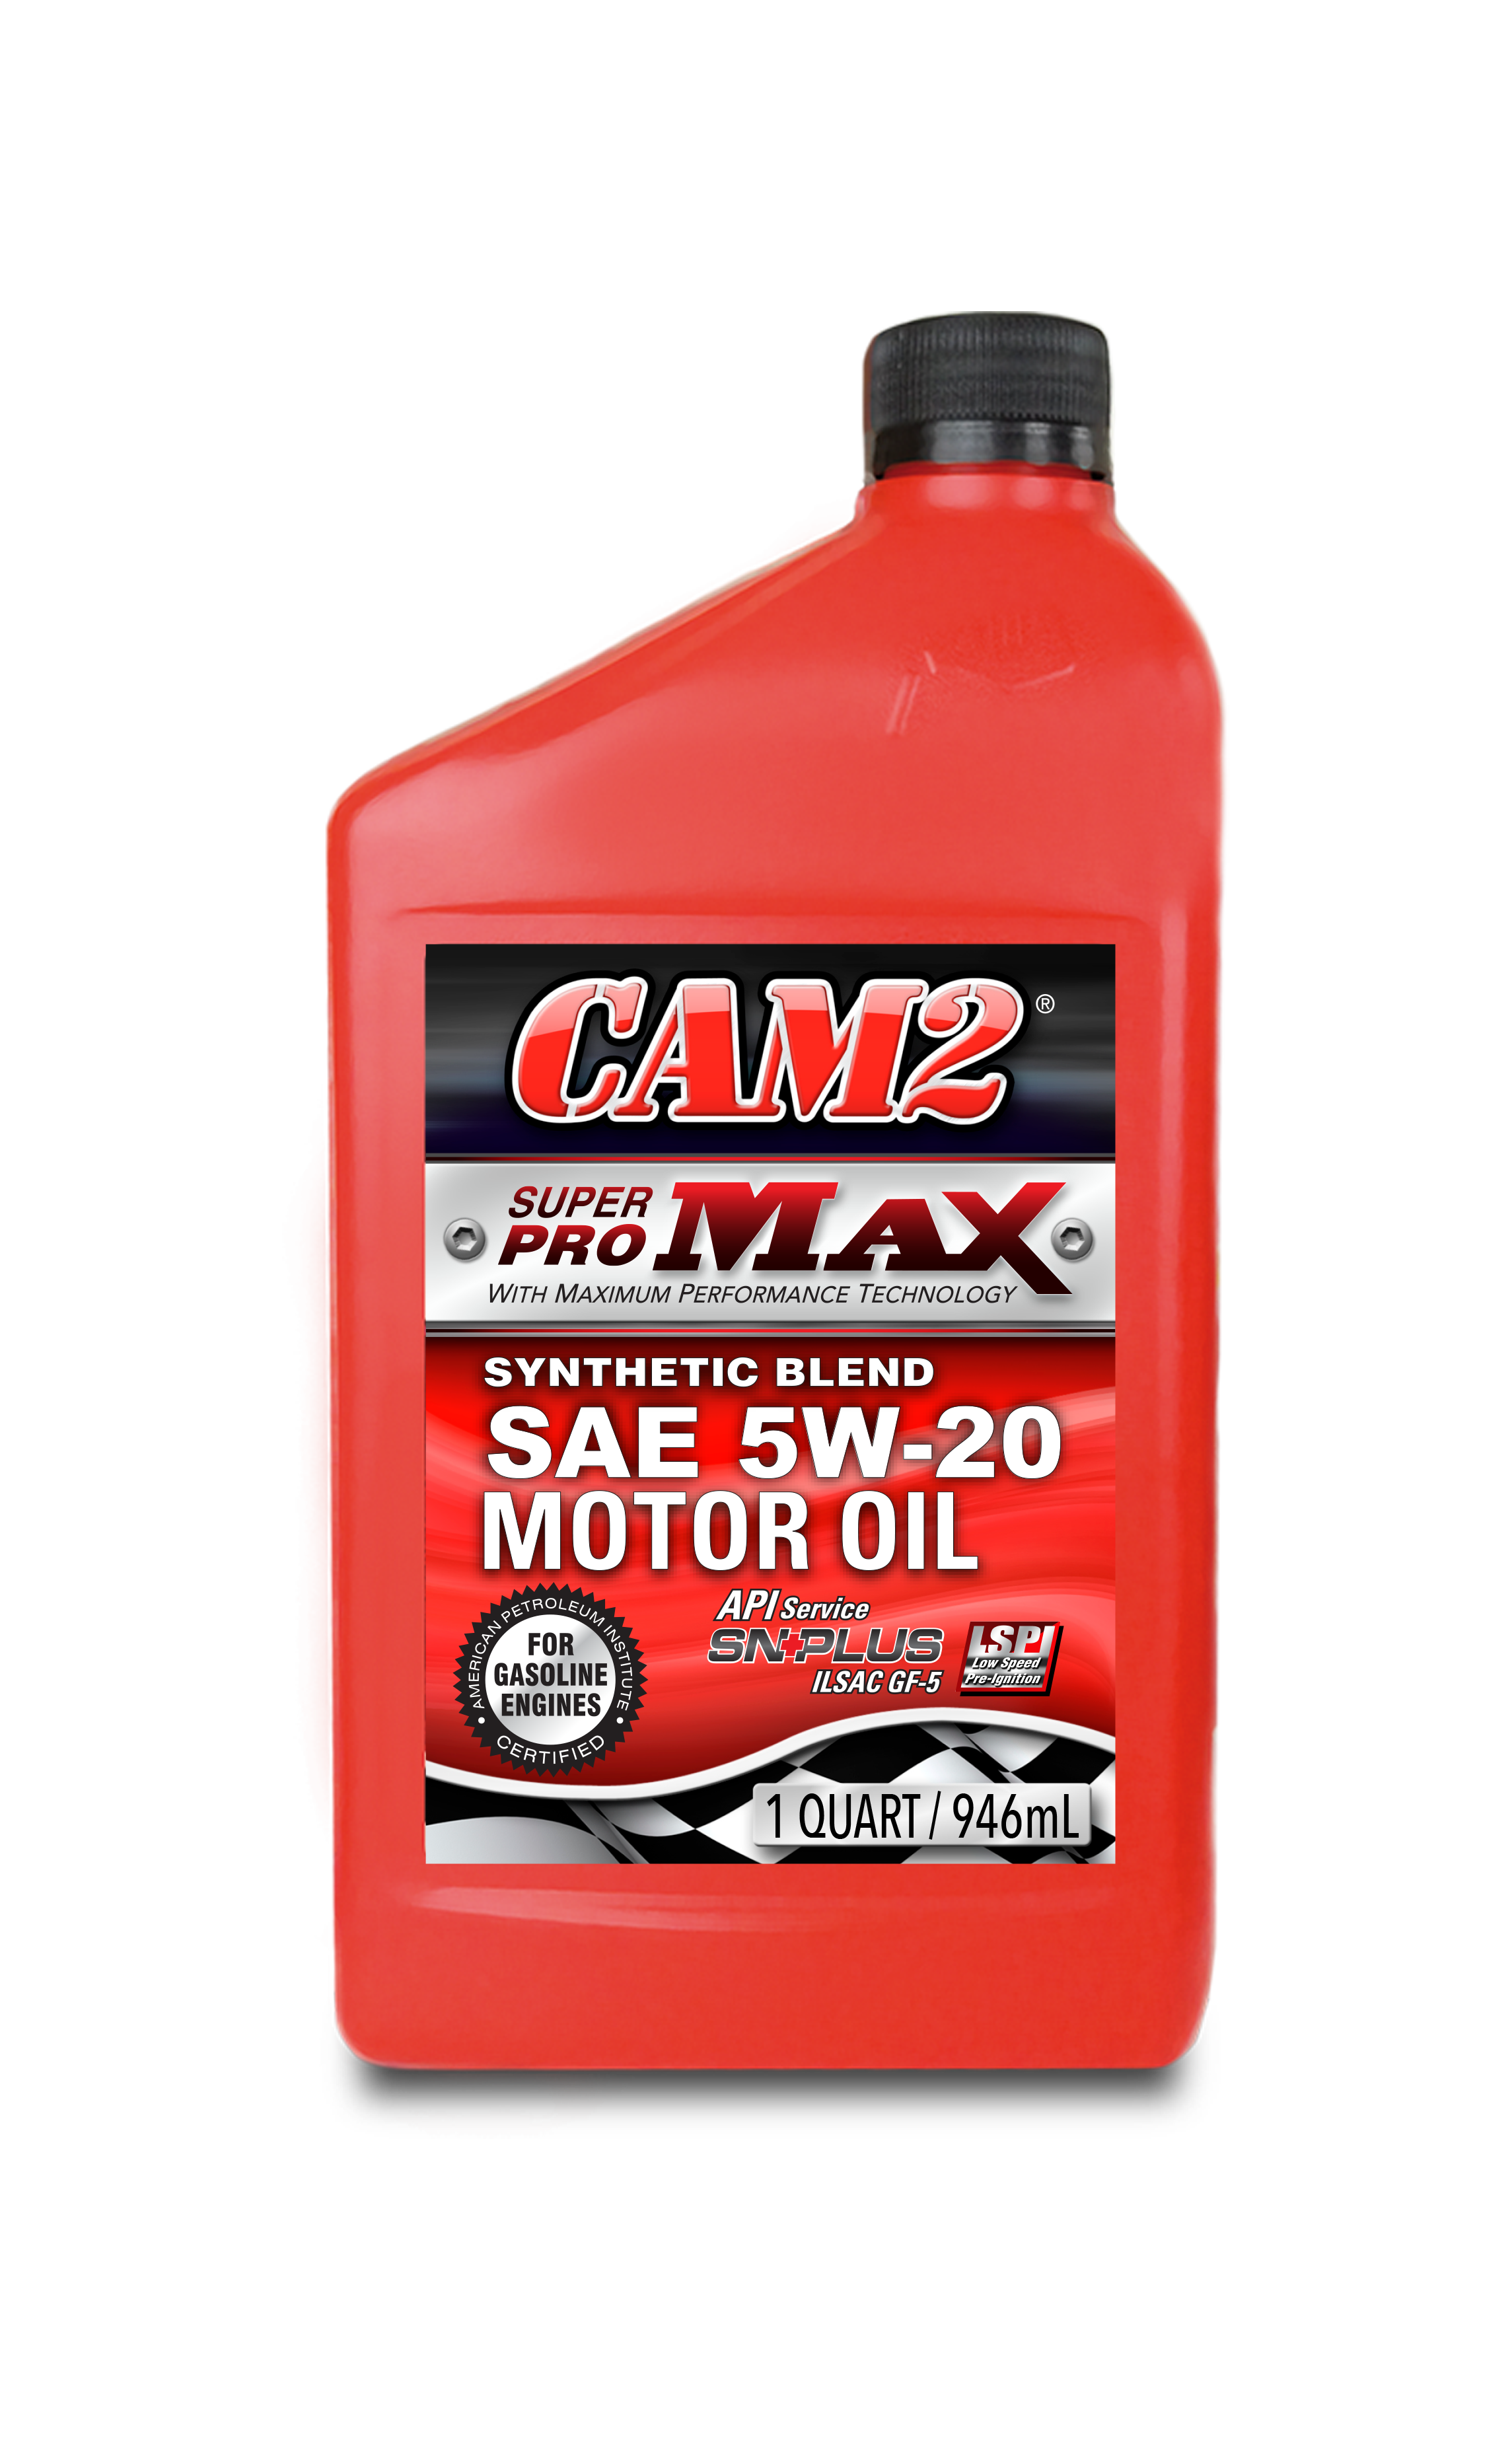 CAM2 SUPERPRO MAX 5W-20 SYNTHETIC BLEND MOTOR OIL 80565-408